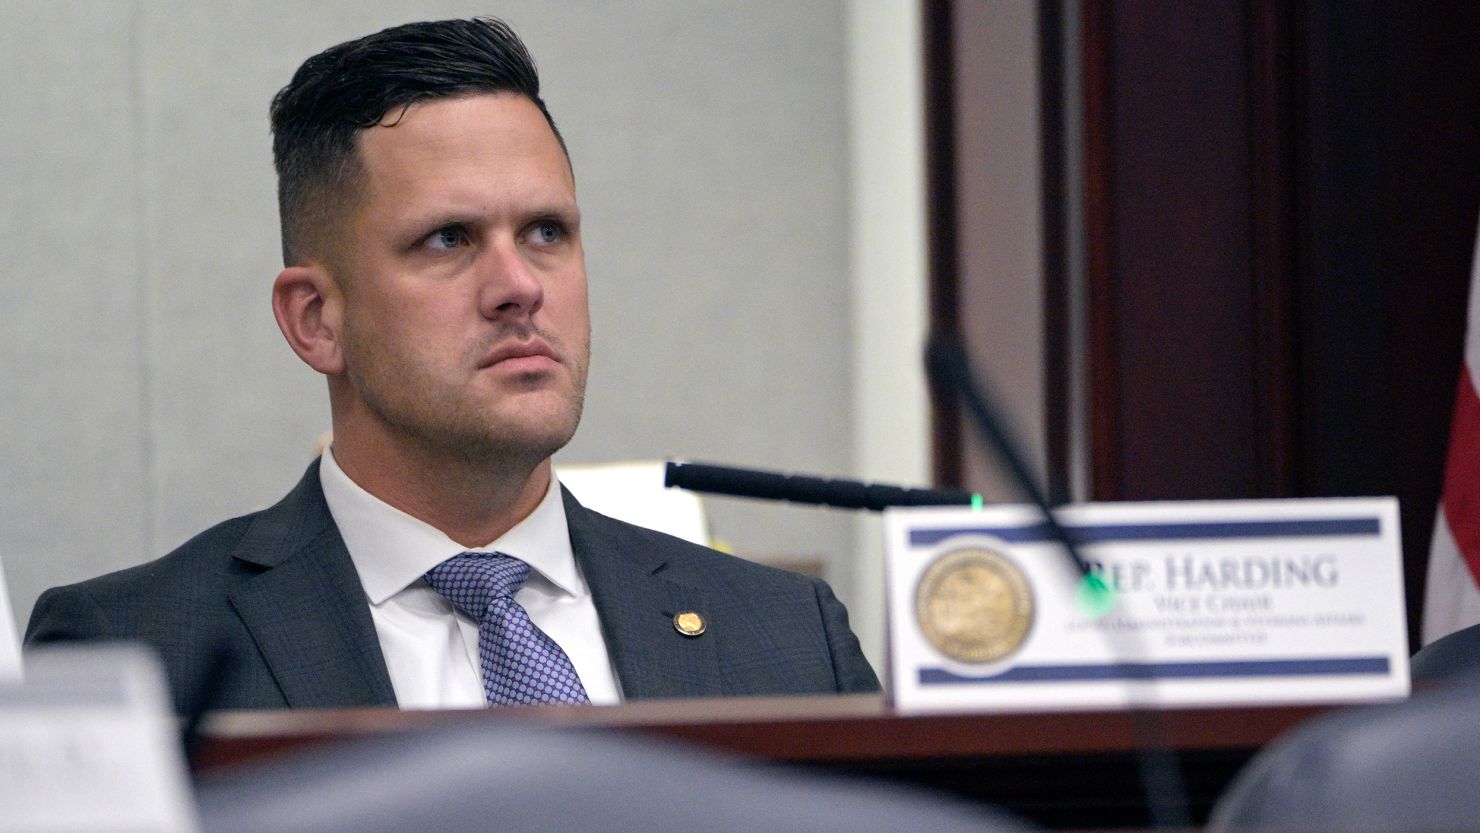 Former Florida state Rep. Joe Harding listens during a Local Administration and Veterans Affairs Subcommittee hearing in a legislative session on January 13, 2022, in Tallahassee, Florida. Harding pleaded guilty in a Covid-19 relief fraud case on March 21, 2022. 